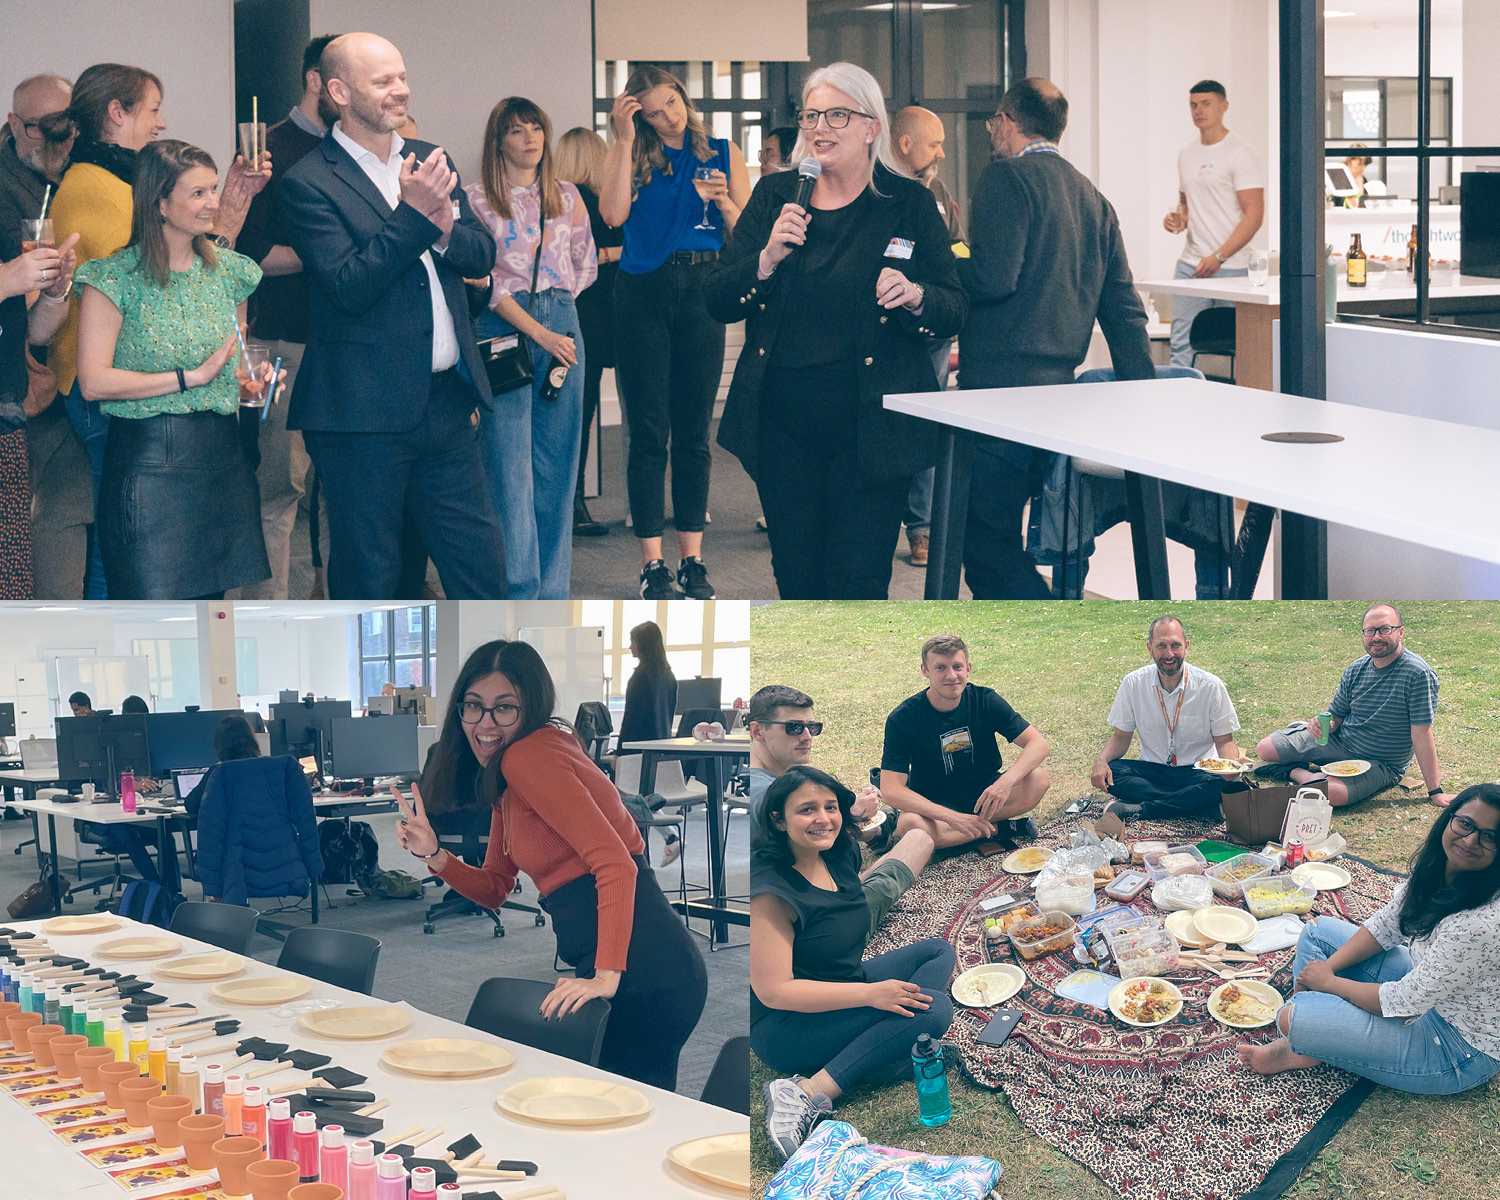 A collection of images from ThoughtWorks Newcastle. First: a group of colleagues listening to another female colleague giving a speech. Second: a happy Thoughtworker poses in front of some paint supplies. Third: a group of colleagues out for a picnic in a park.